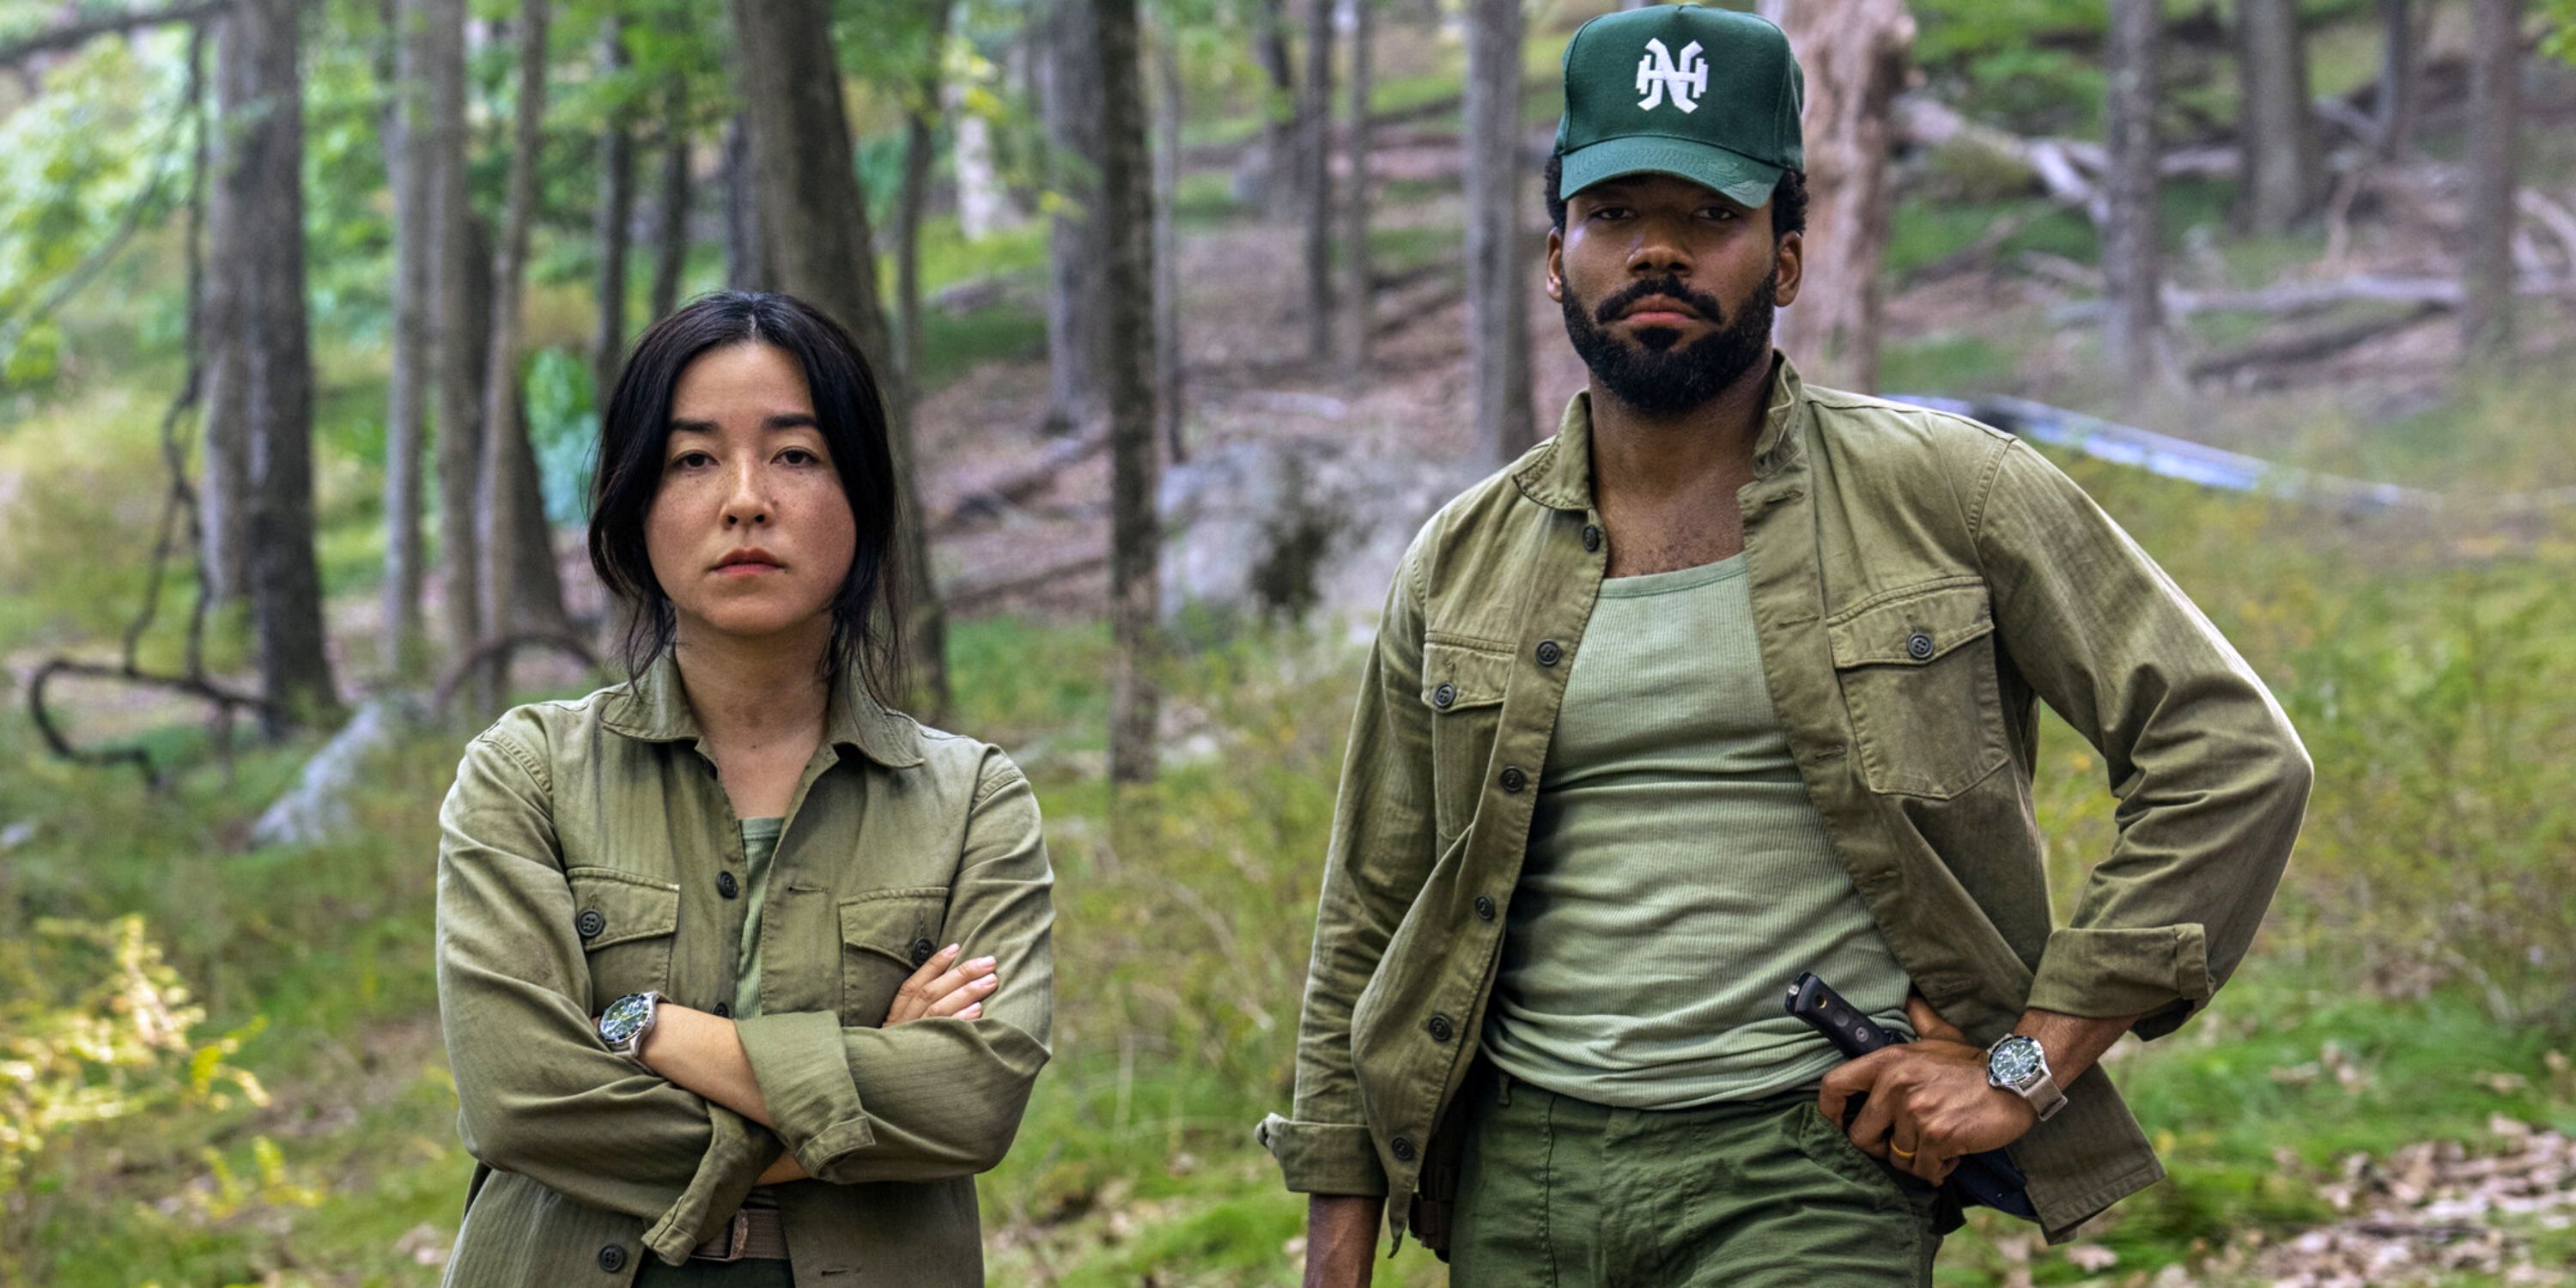 Donald Glover as John Smith and Maya Erskine as Jane Smith in Mr. & Mrs. Smith